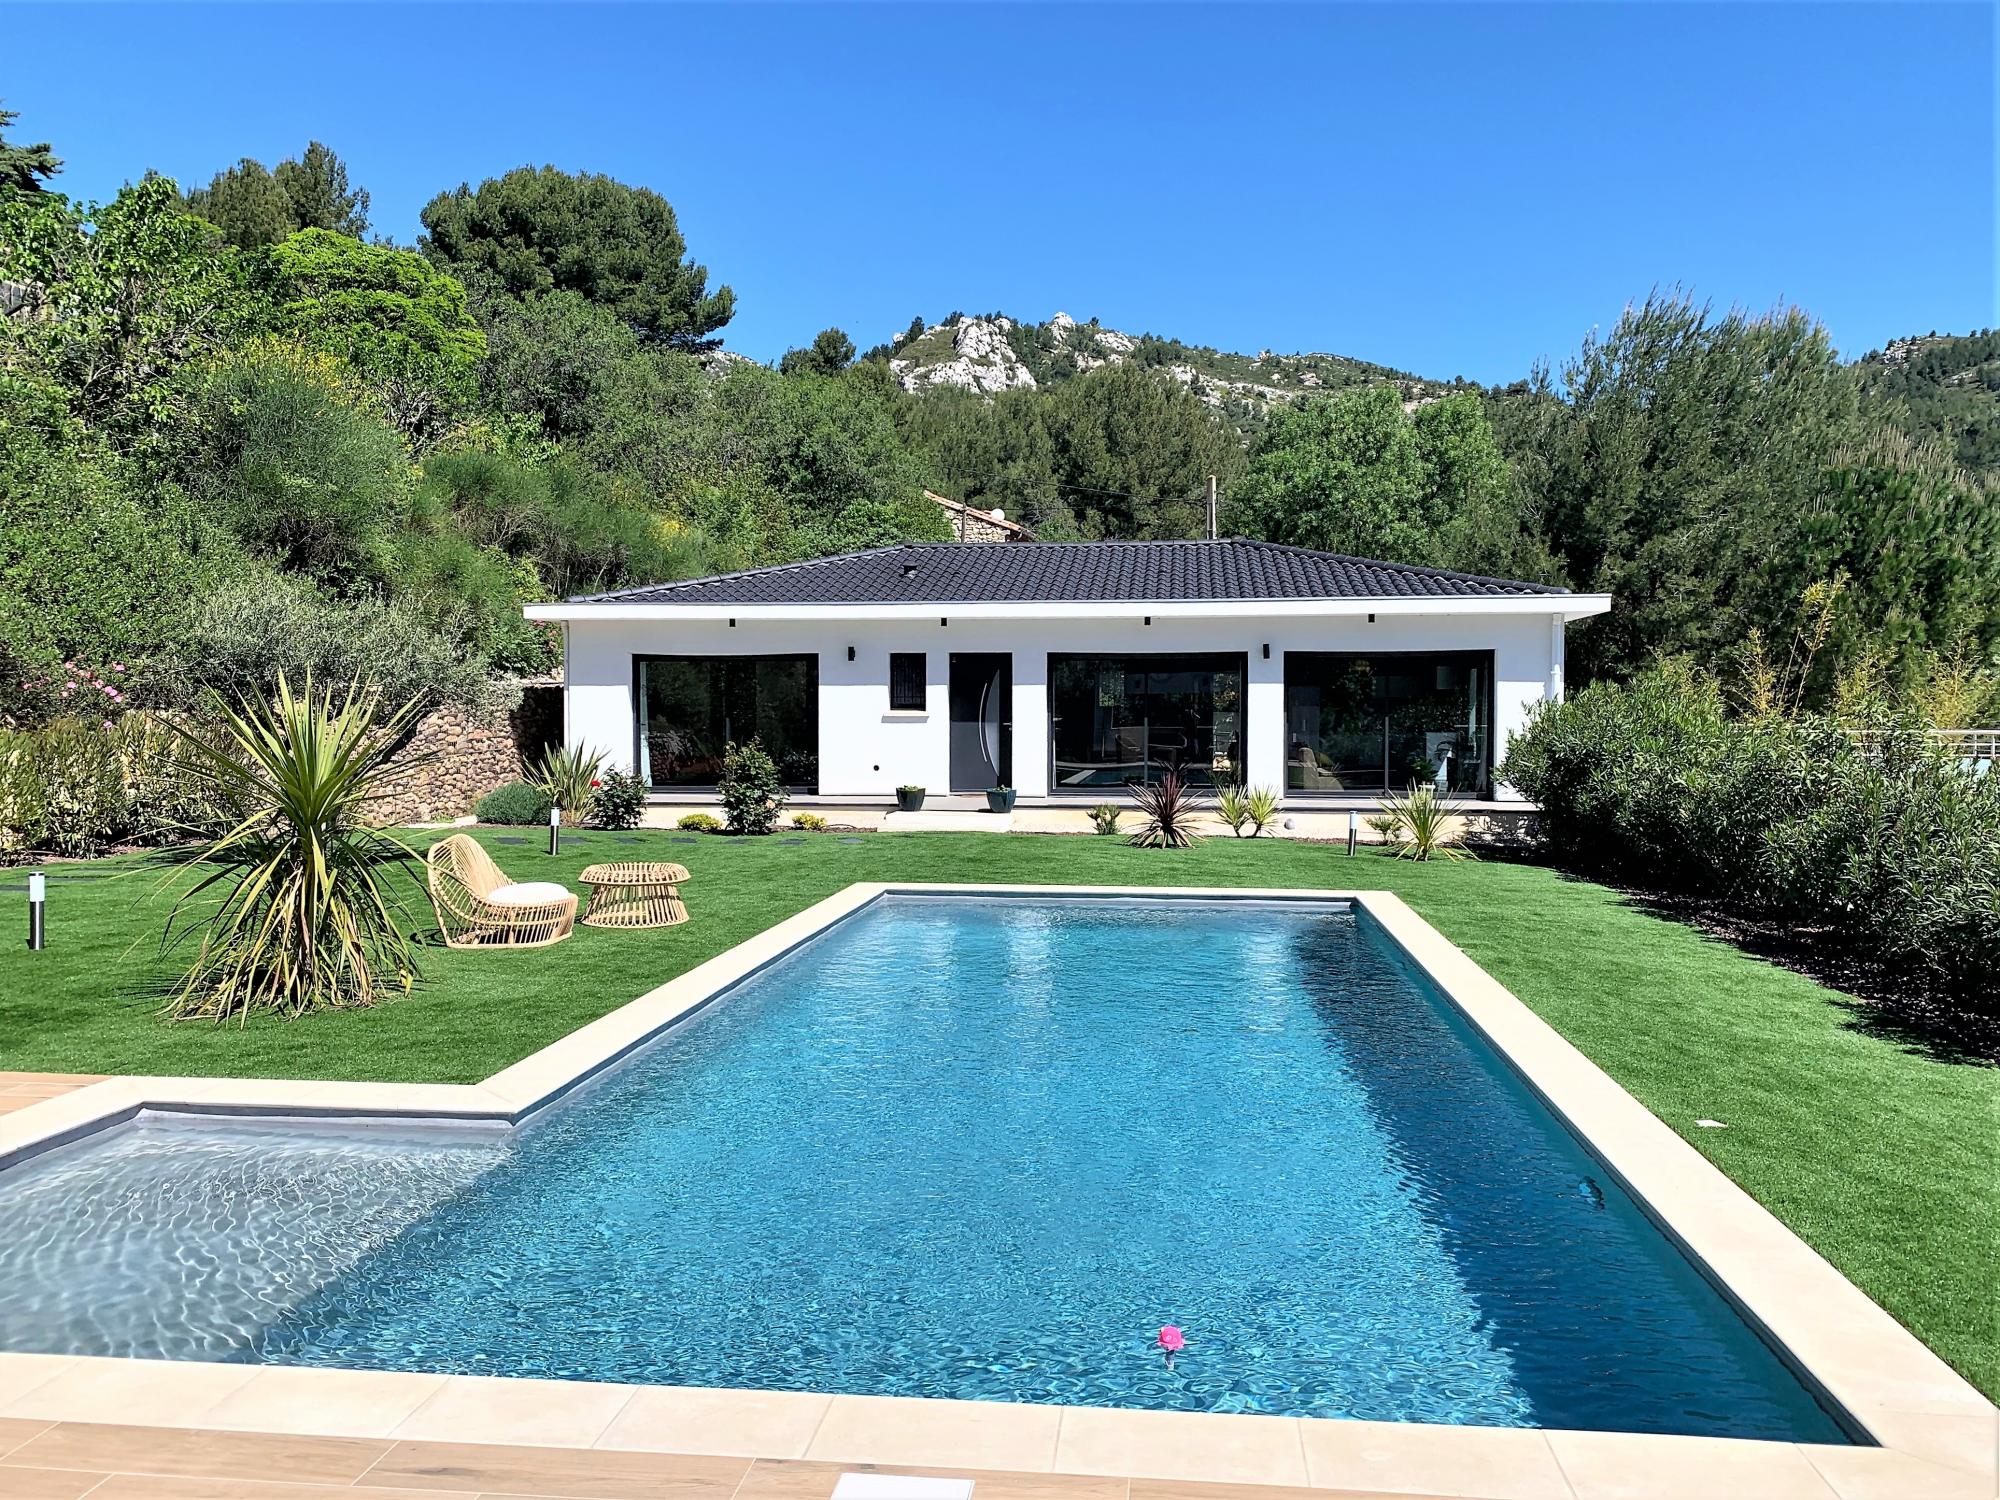 Luxury realestate Country off Aix, Lubron